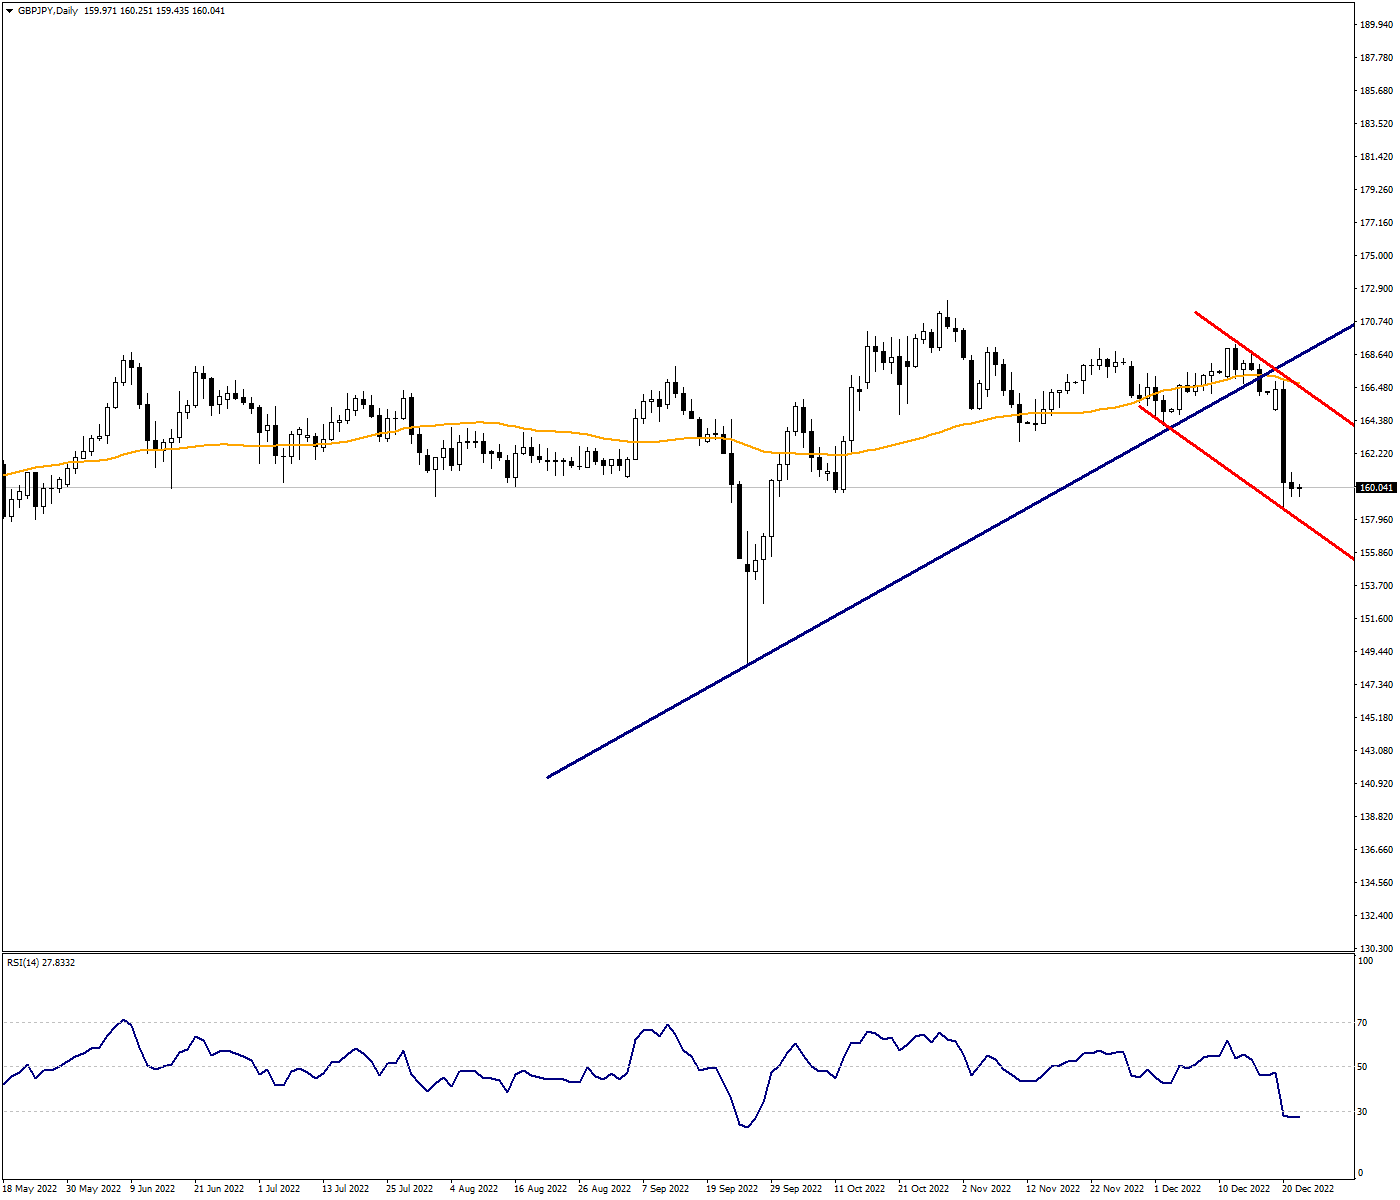 Descending Channel Movement Continues In GBPJPY